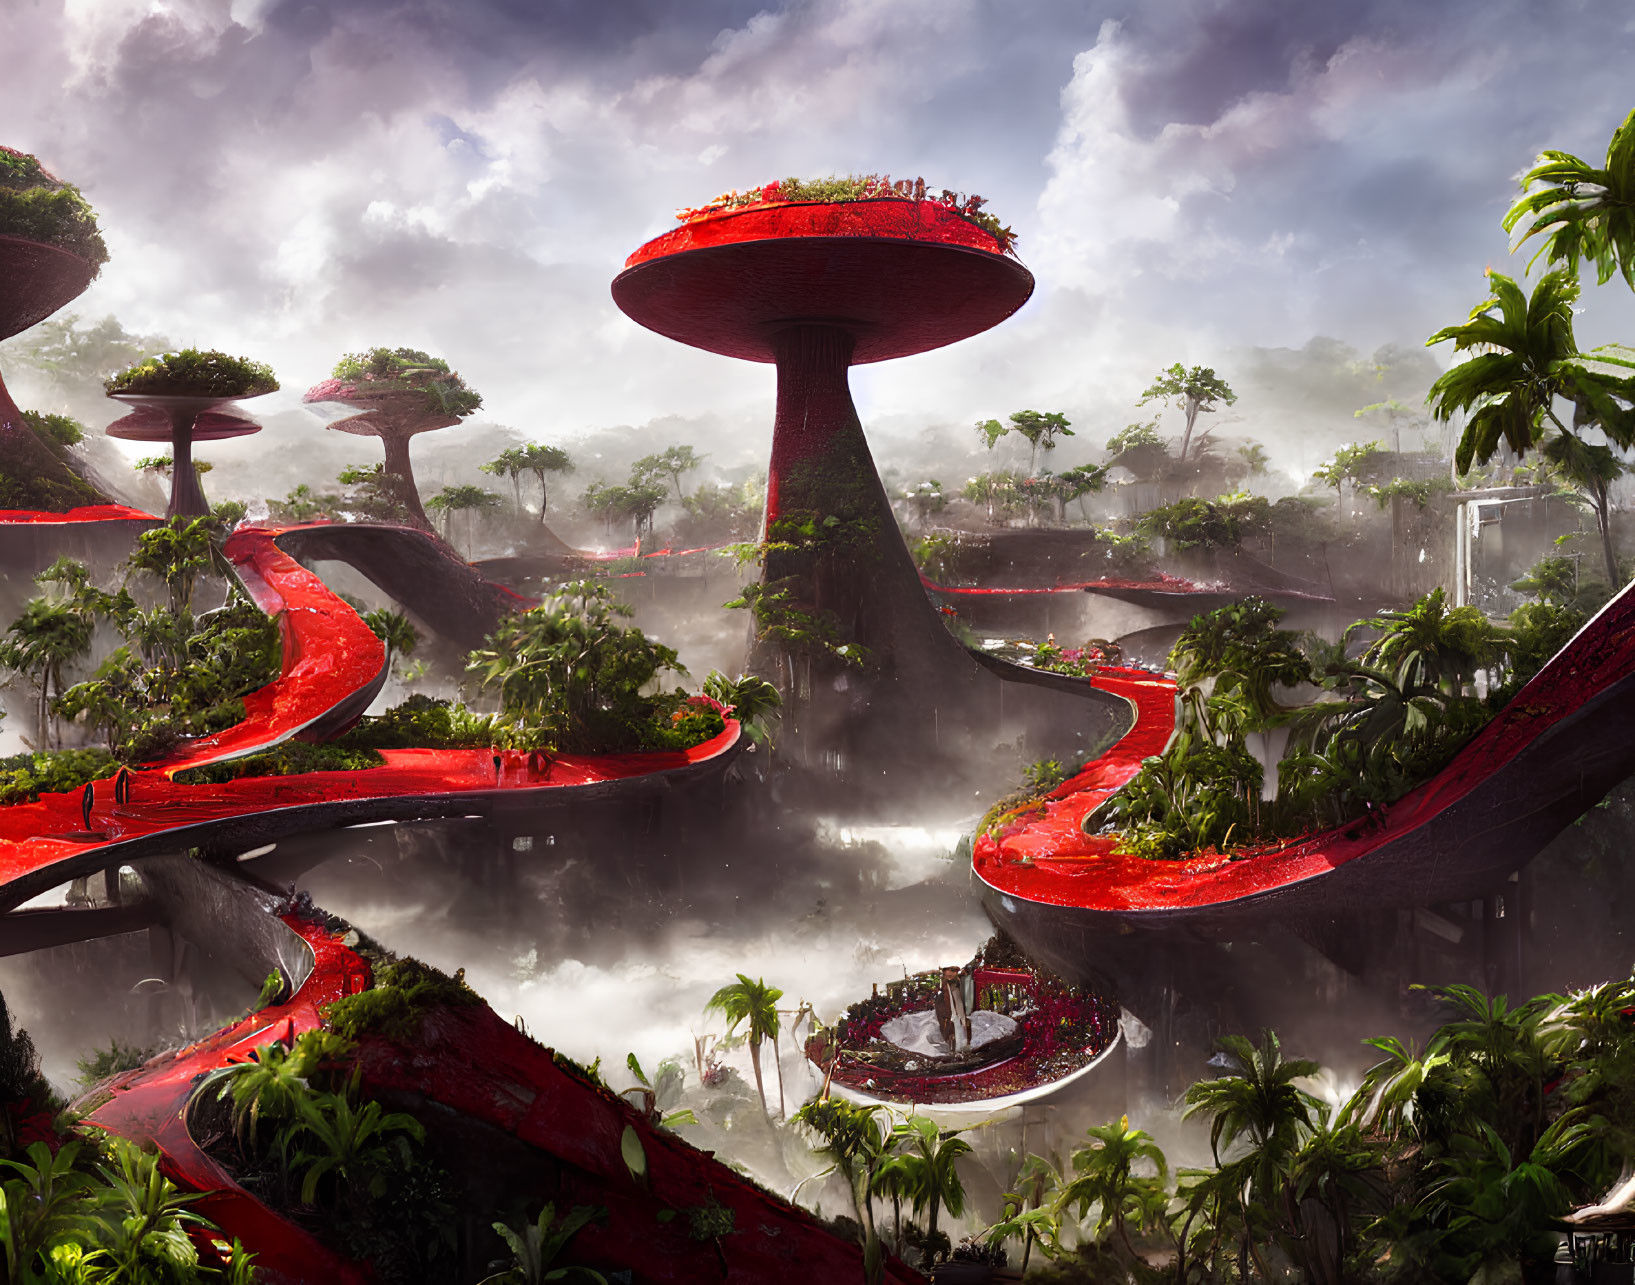 Sci-fi cityscape with red mushroom towers in misty rainforest.